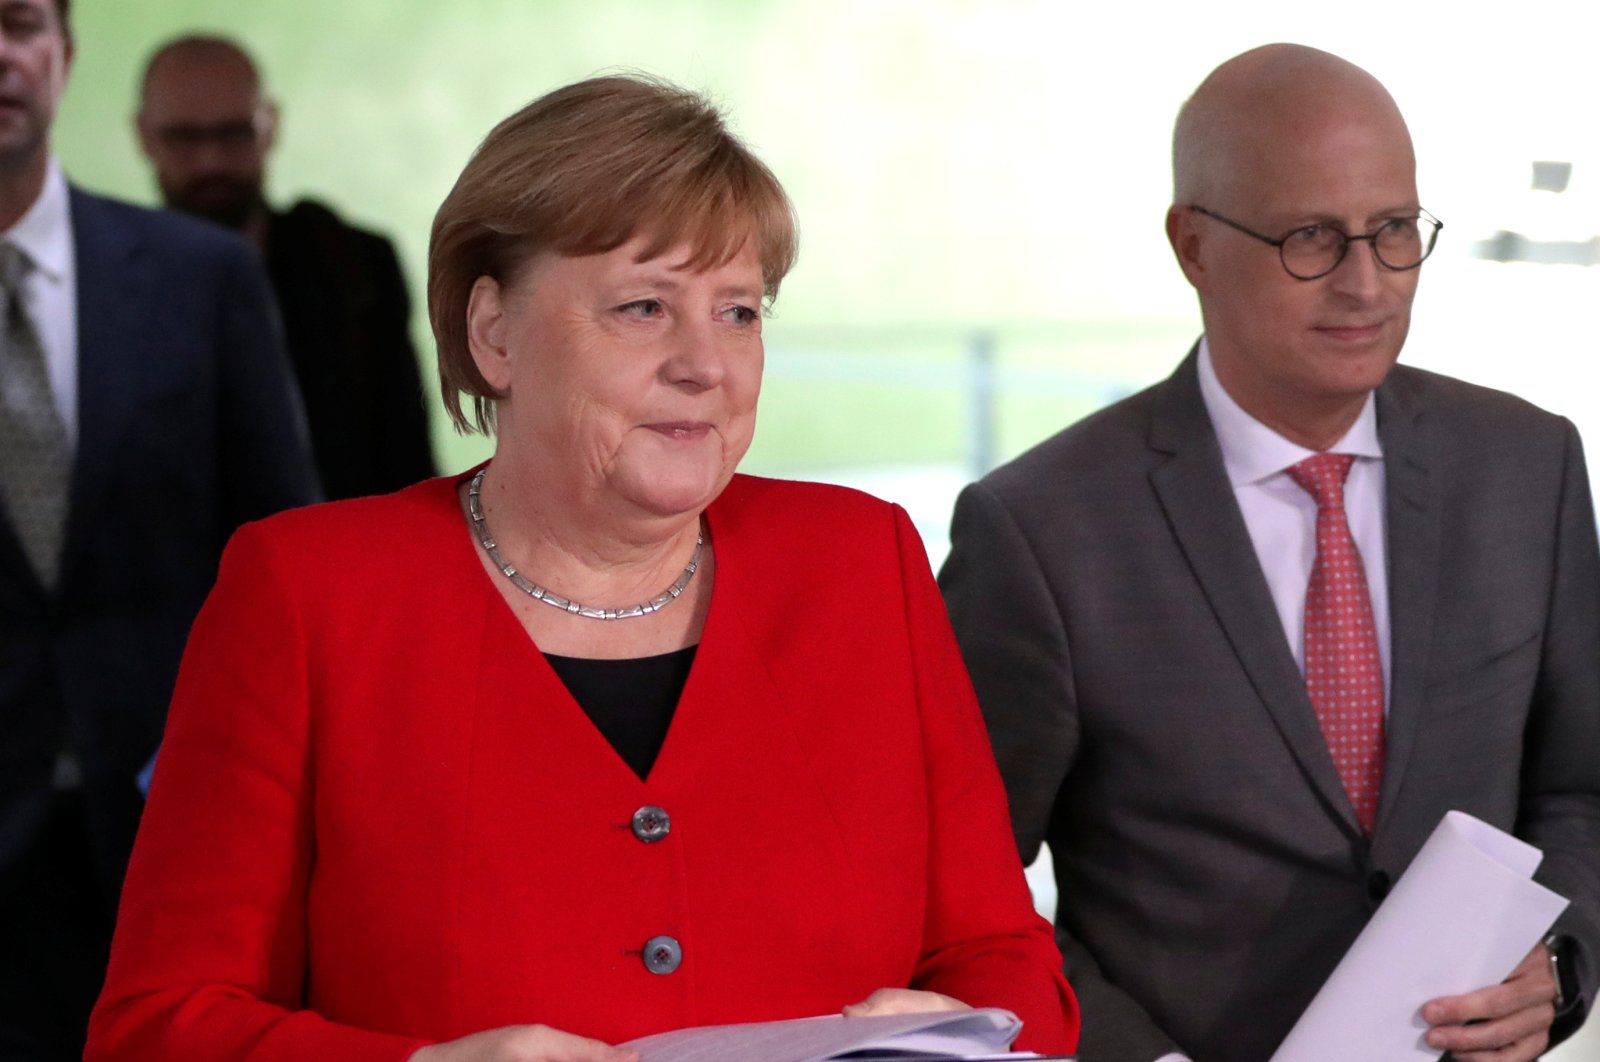 German Chancellor Angela Merkel (L) and Peter Tschentscher, First Mayor of Hamburg, arrive at a news conference after an online meeting with German state governors on the loosening of the restrictions to reduce the spread of the coronavirus disease (COVID-19), Berlin, Germany, May 6, 2020. (Reuters Photo)